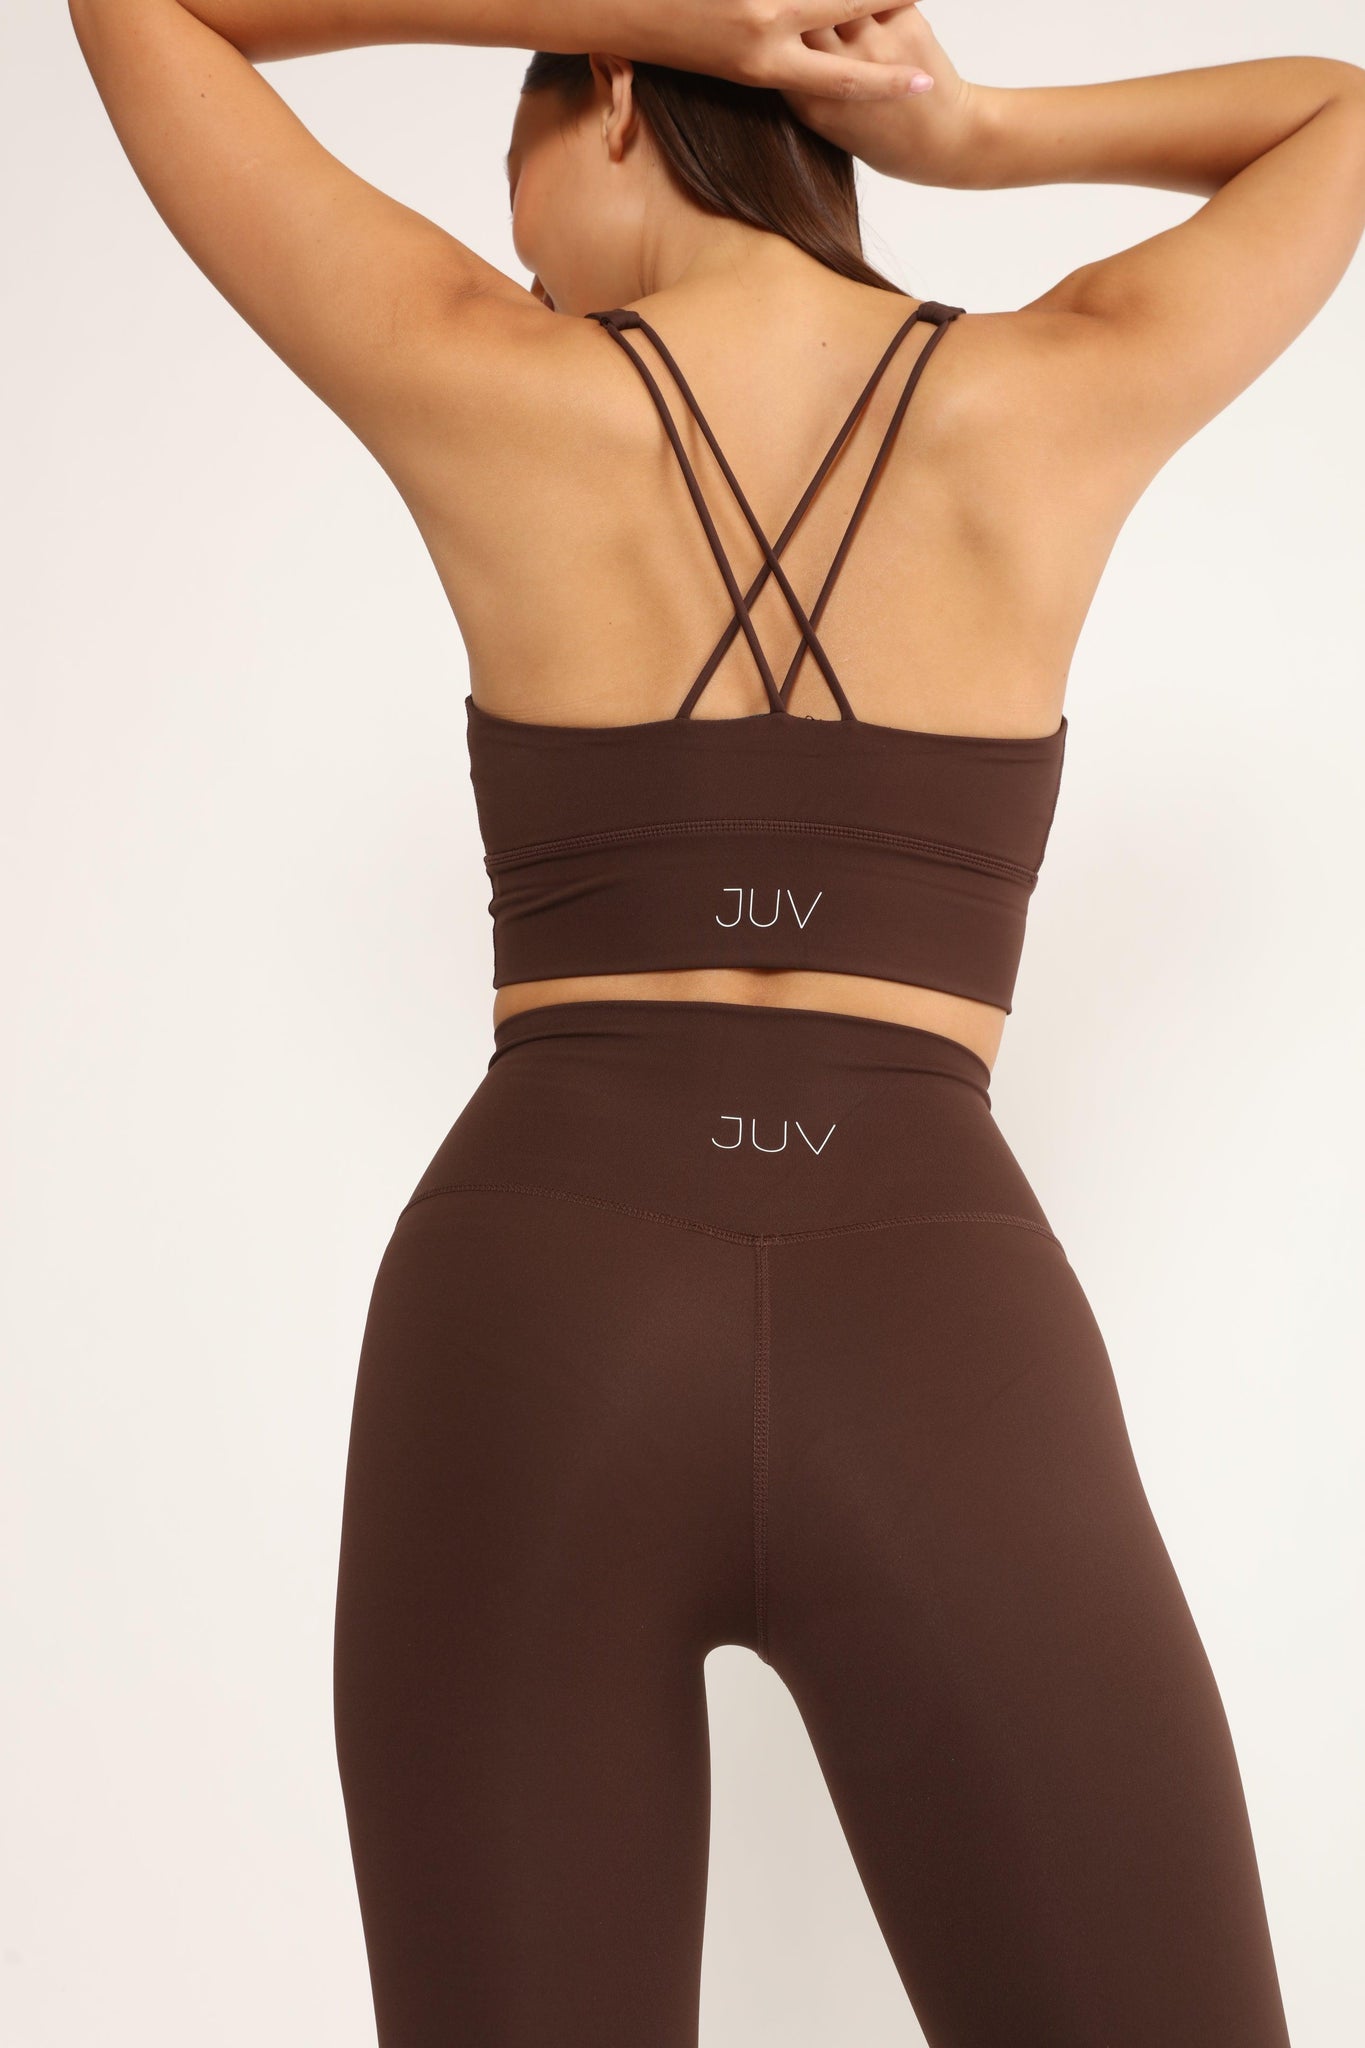 JUV unicorn legging in brown color, close up back view.